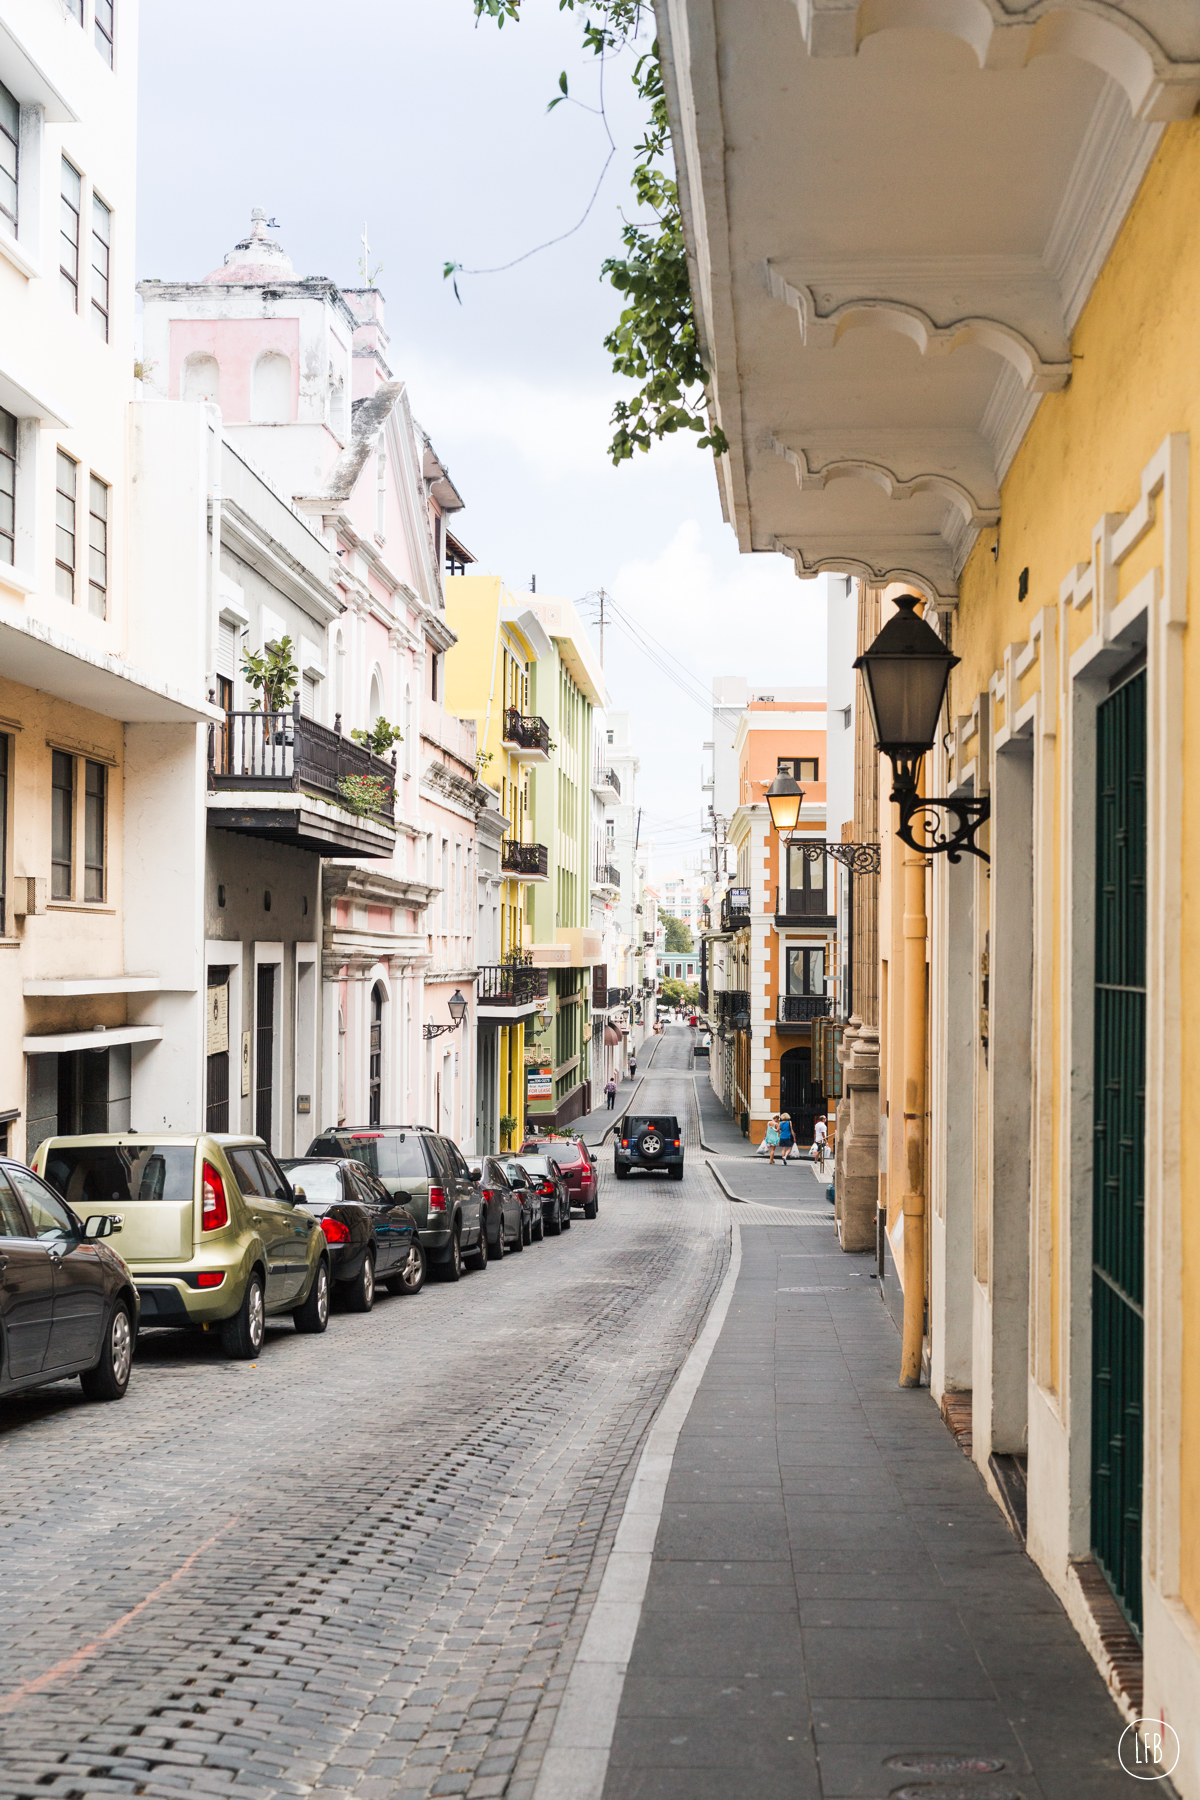 Old town San Juan in Puerto Rico - photography: Rae Tashman for The Dreamcatcher